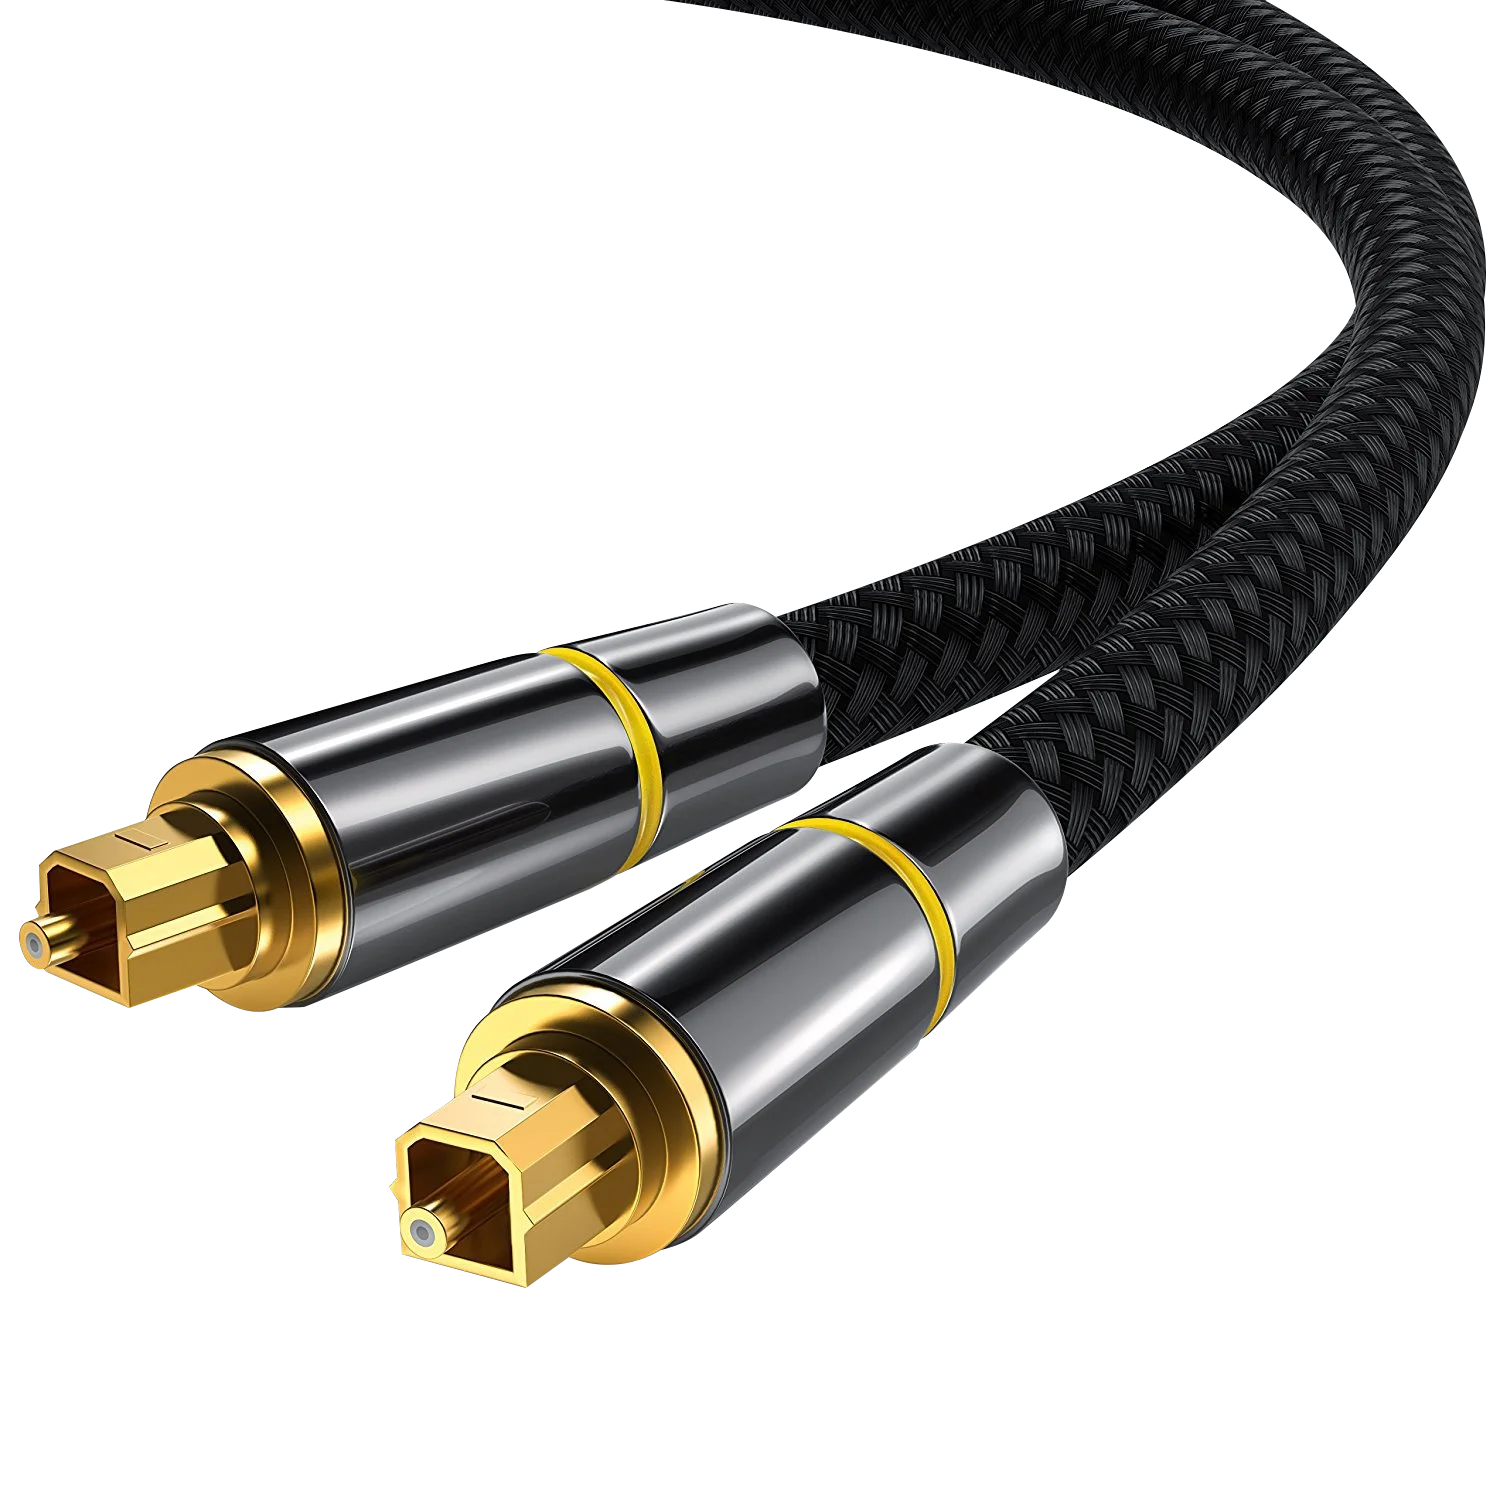 toslink_cable_category